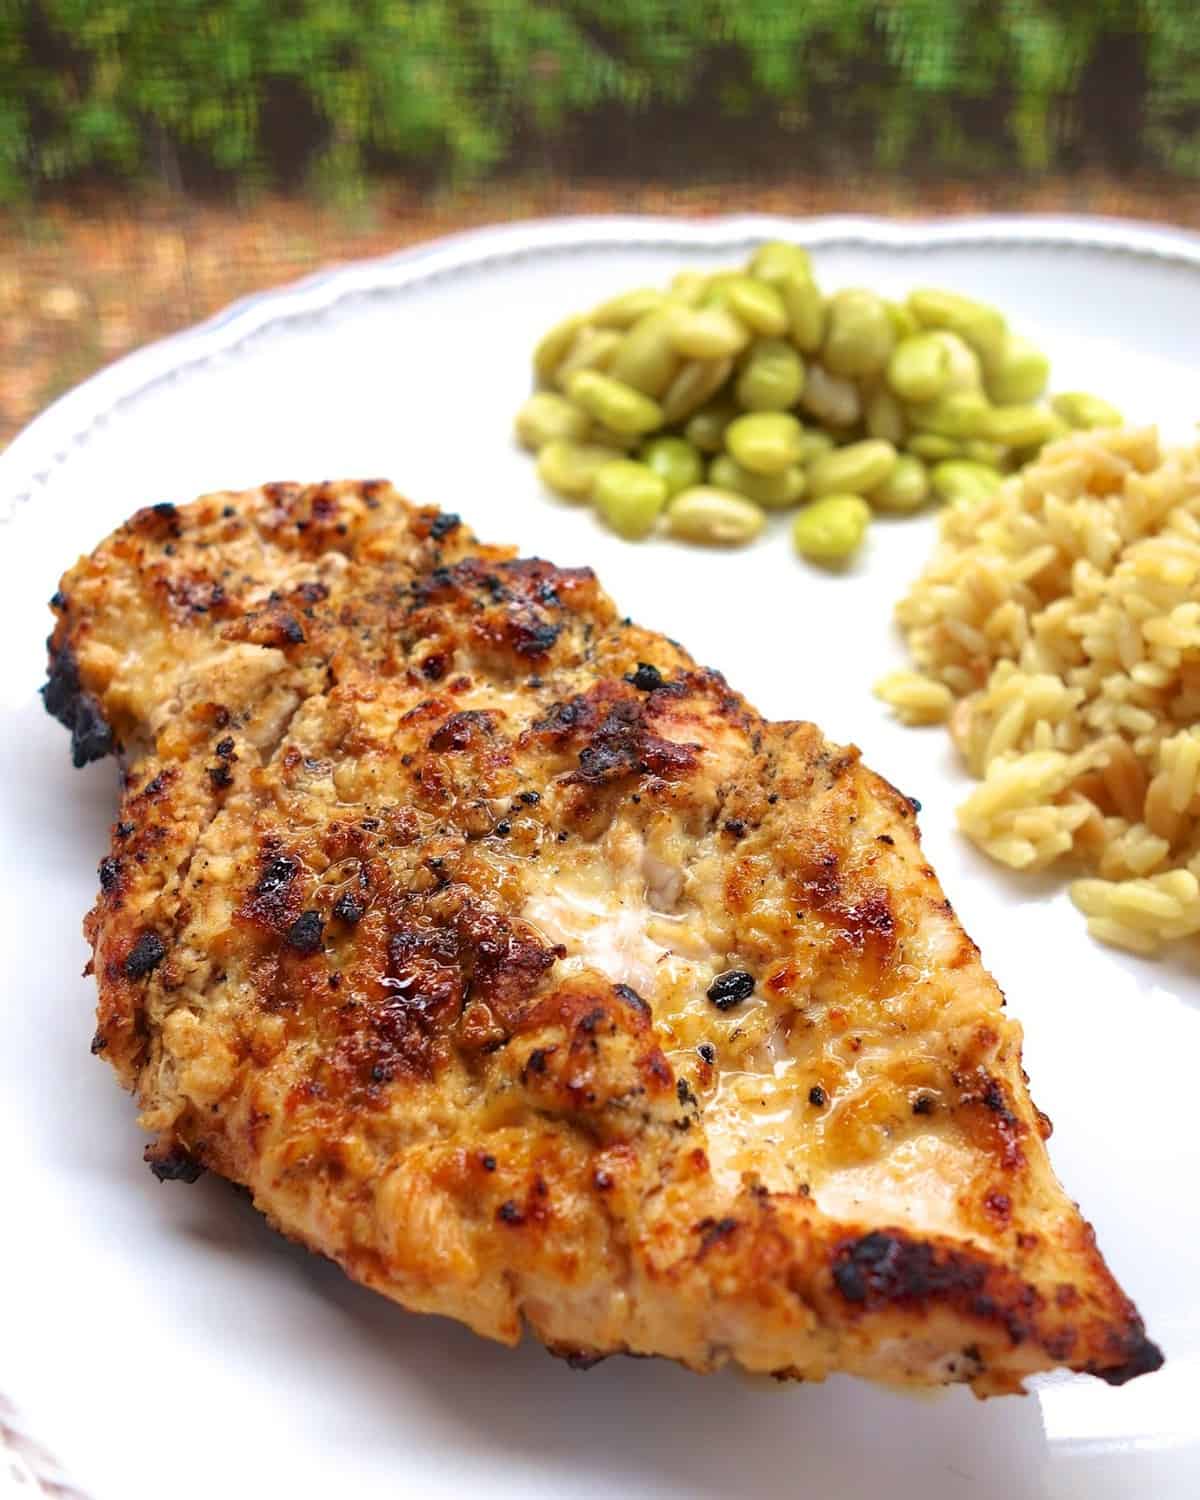 Lemon Garlic Marinade - our favorite! SO simple and SOOO delicious! Chicken marinated in olive oil, dijon mustard, garlic, salt, pepper and lemons. Everyone raves about this chicken!! TONS of flavor!